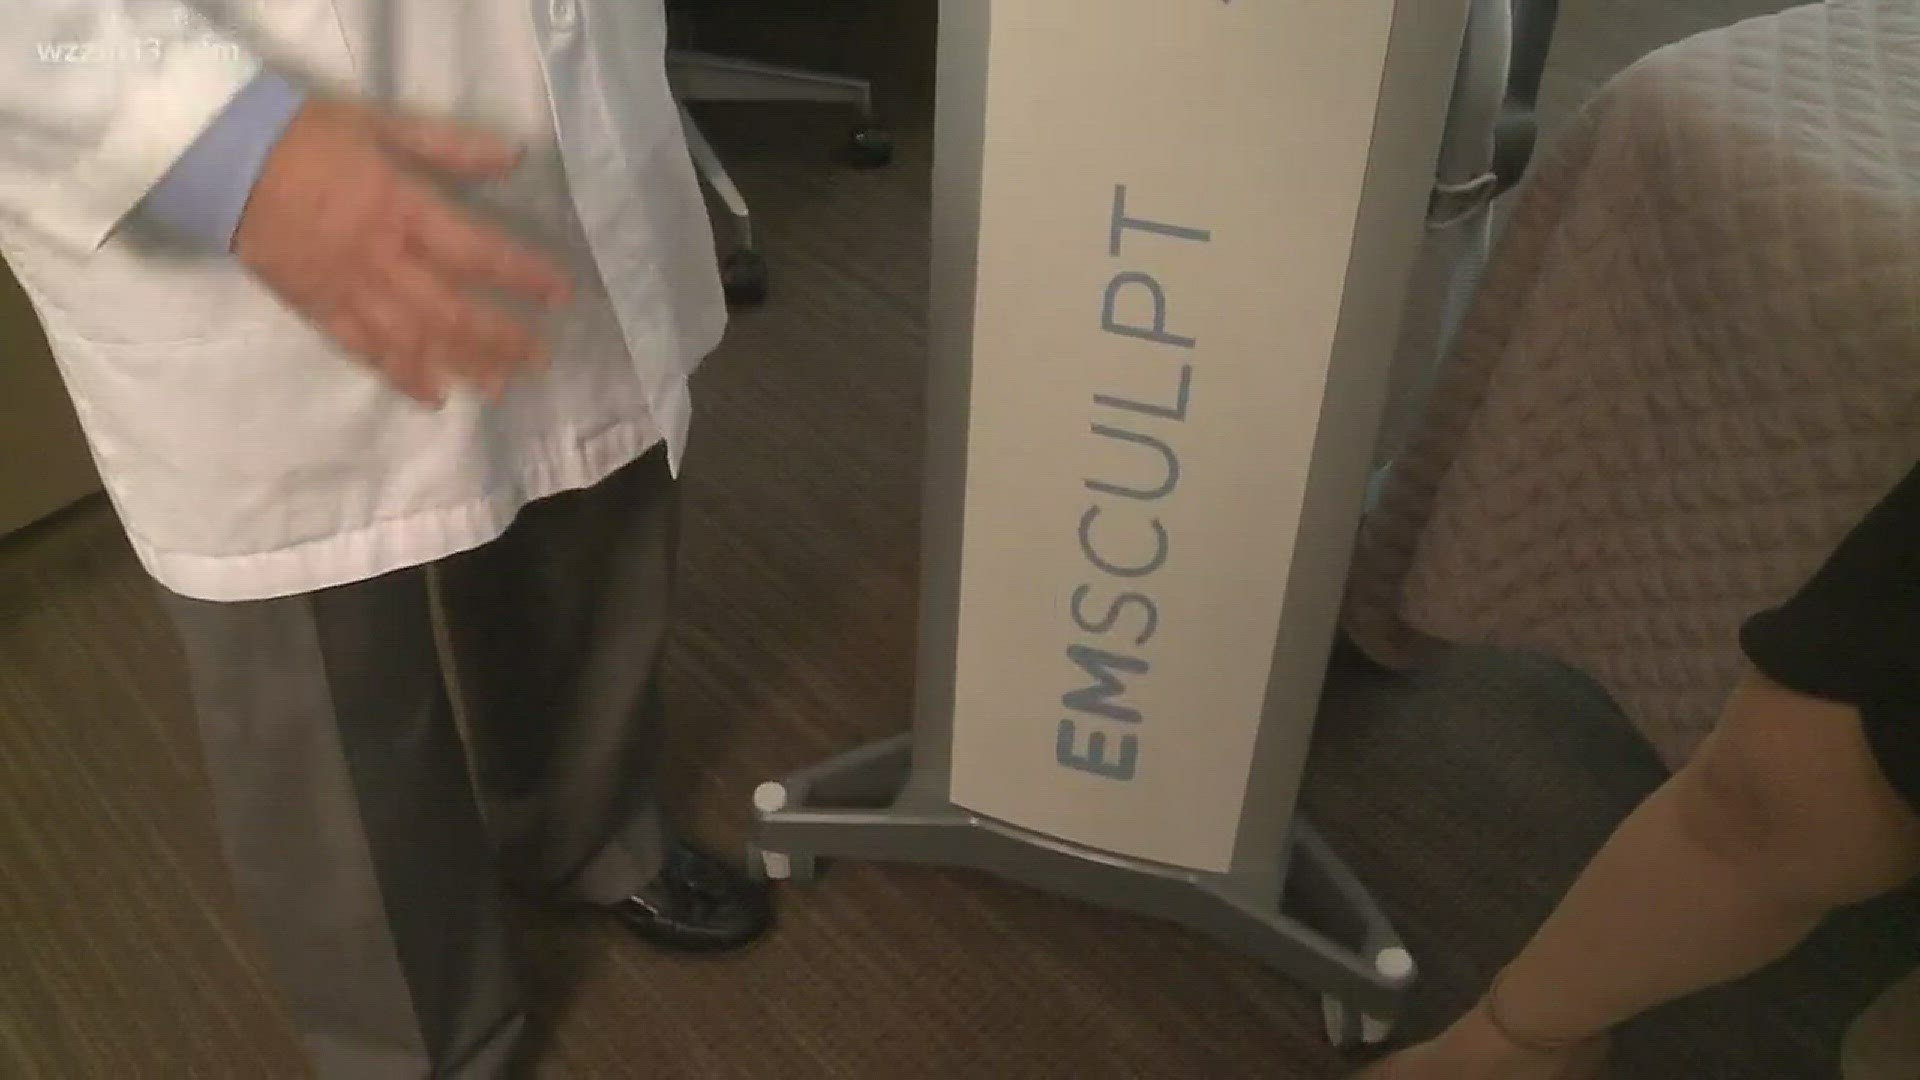 EMSculpt Reduces Fat And Builds Muscle